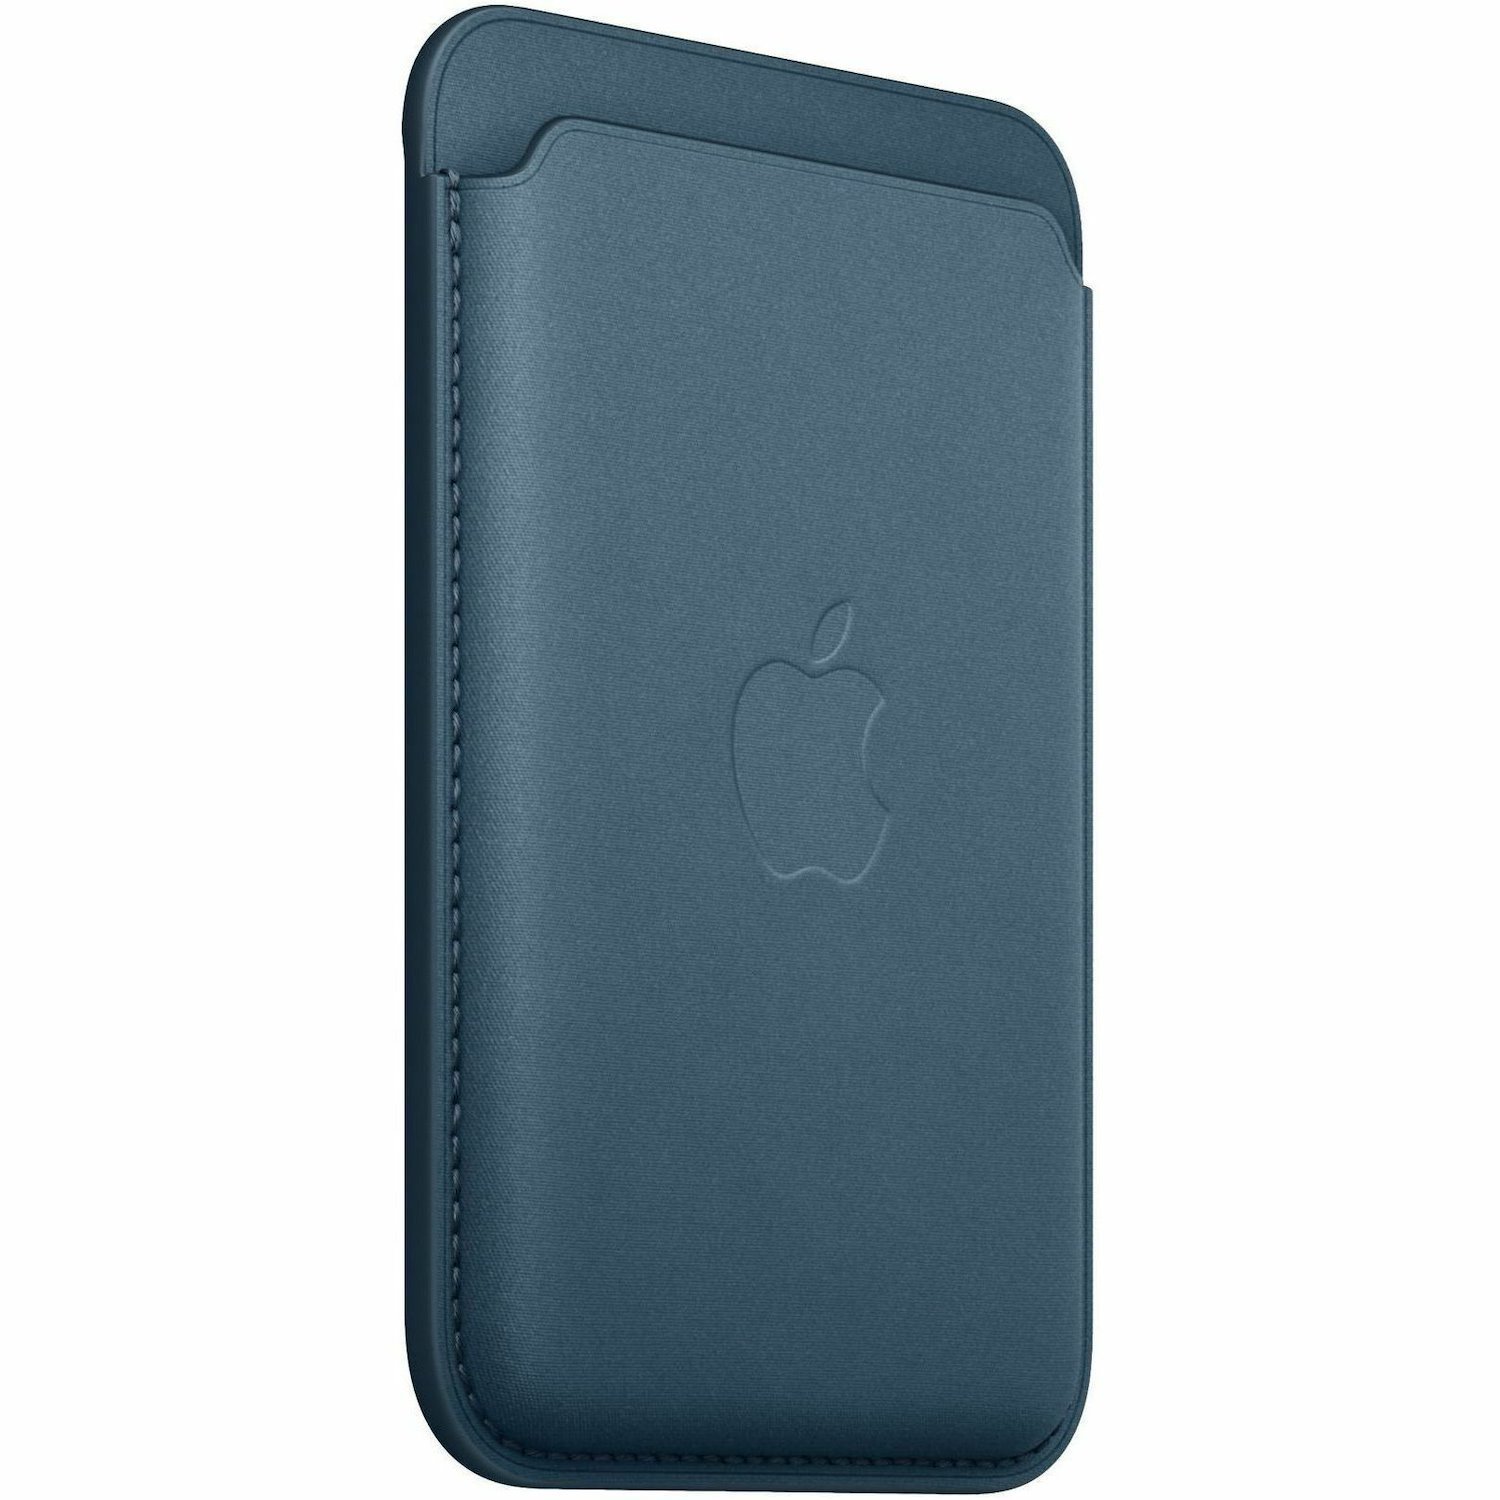 Apple Carrying Case (Wallet) Apple iPhone 15 Pro, iPhone 15 Pro Max, iPhone 15, iPhone 15 Plus, iPhone 14 Pro Max, iPhone 14 Pro, iPhone 14, iPhone 14 Plus, iPhone 13 Pro, iPhone 13 Pro Max, iPhone 13 mini, ... Smartphone, ID Card - Pacific Blue